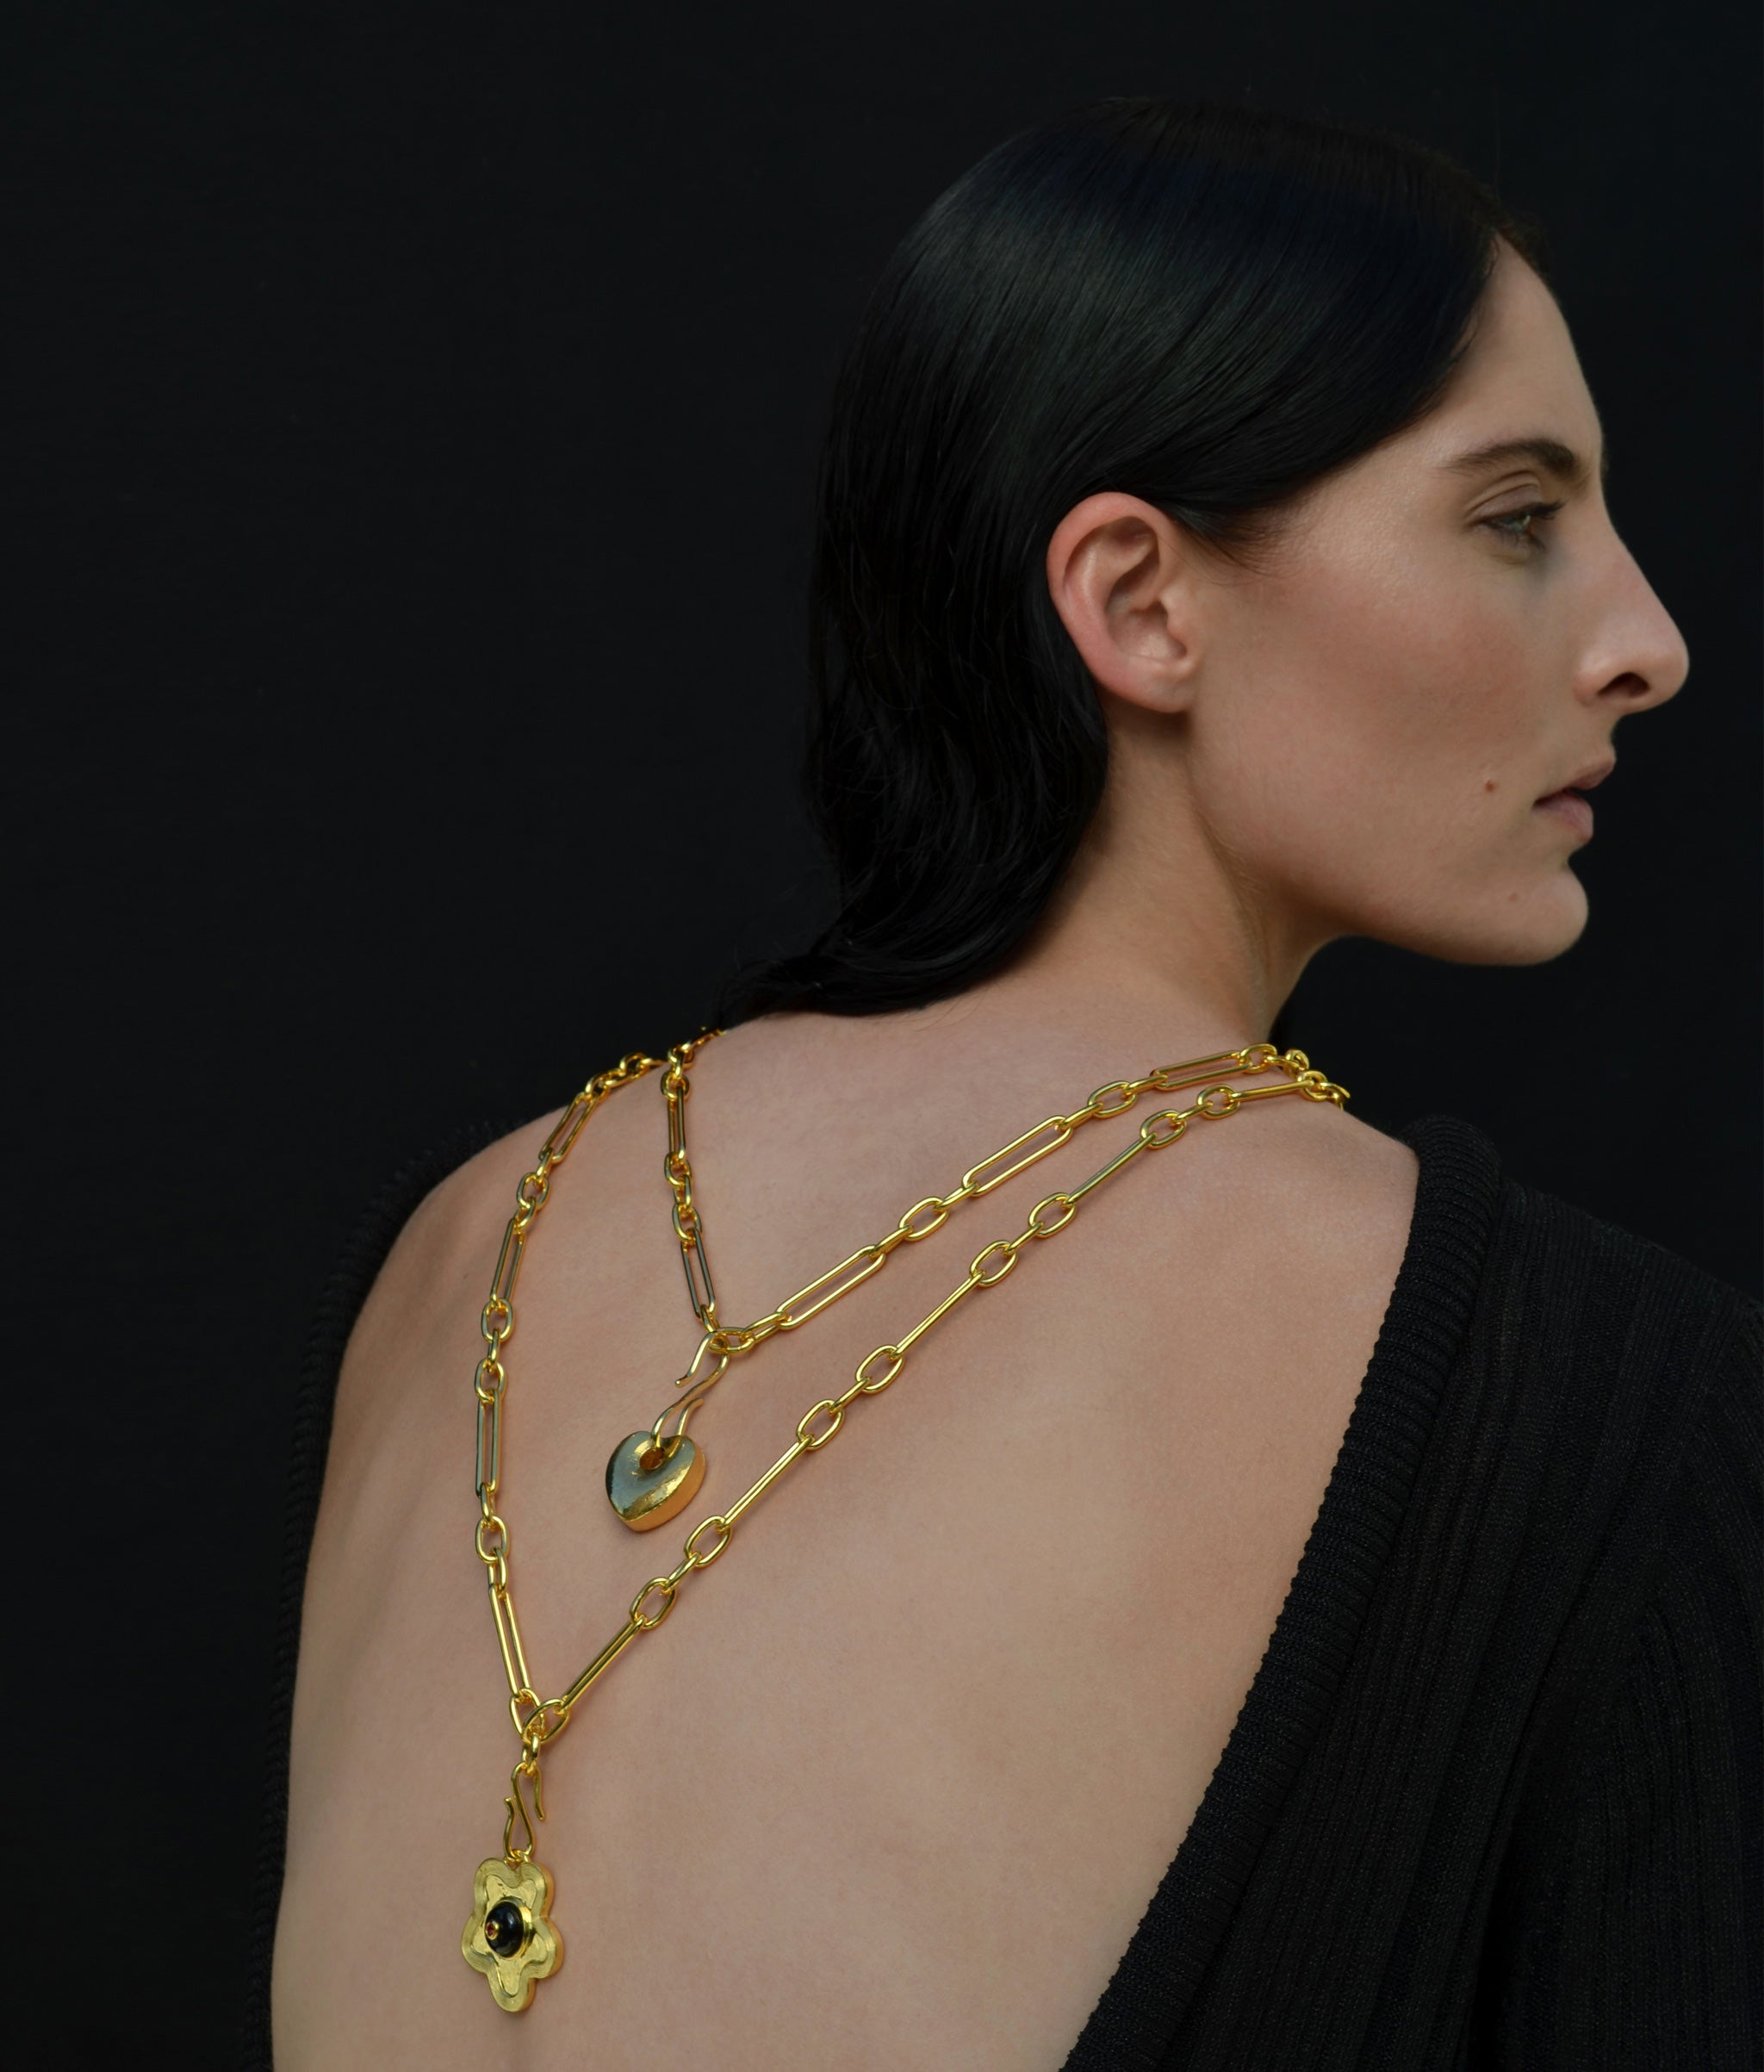 Model on black backdrop wears low-cut black dress and gold chains and charms turned backwards